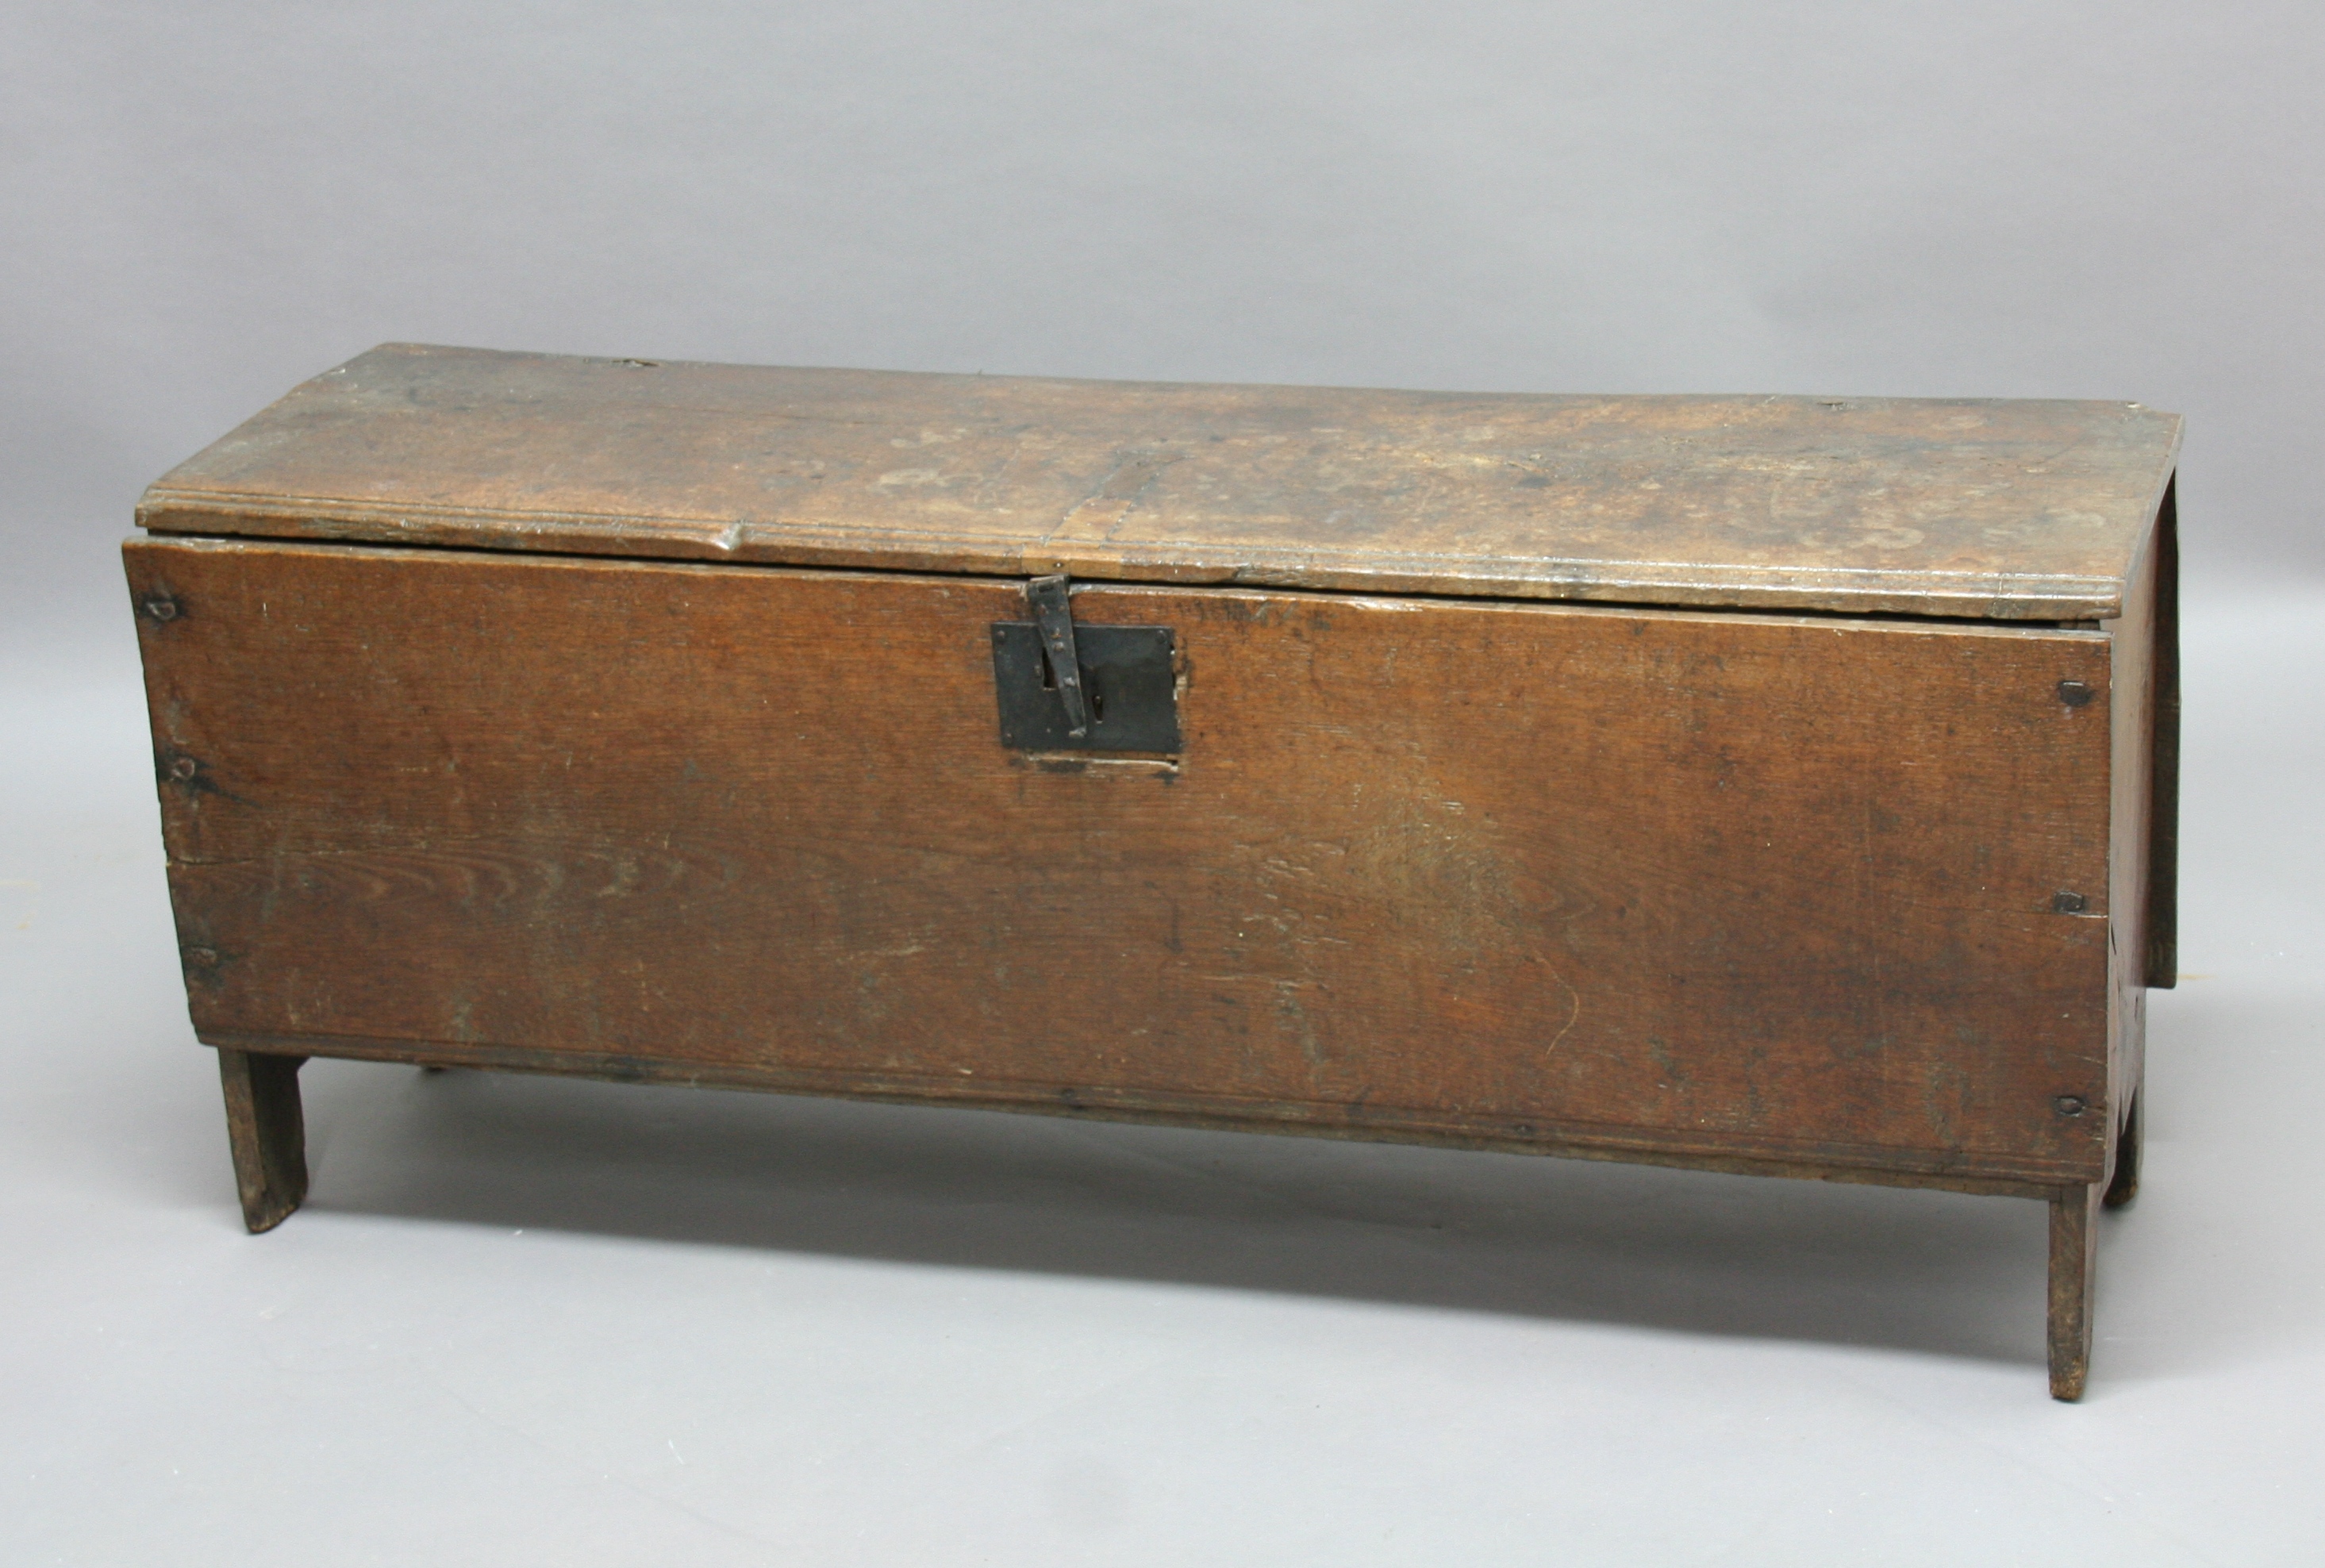 OAK SIX PLANK COFFER, late 17th/18th century, with candle box interior, height 56cm, width 131cm,